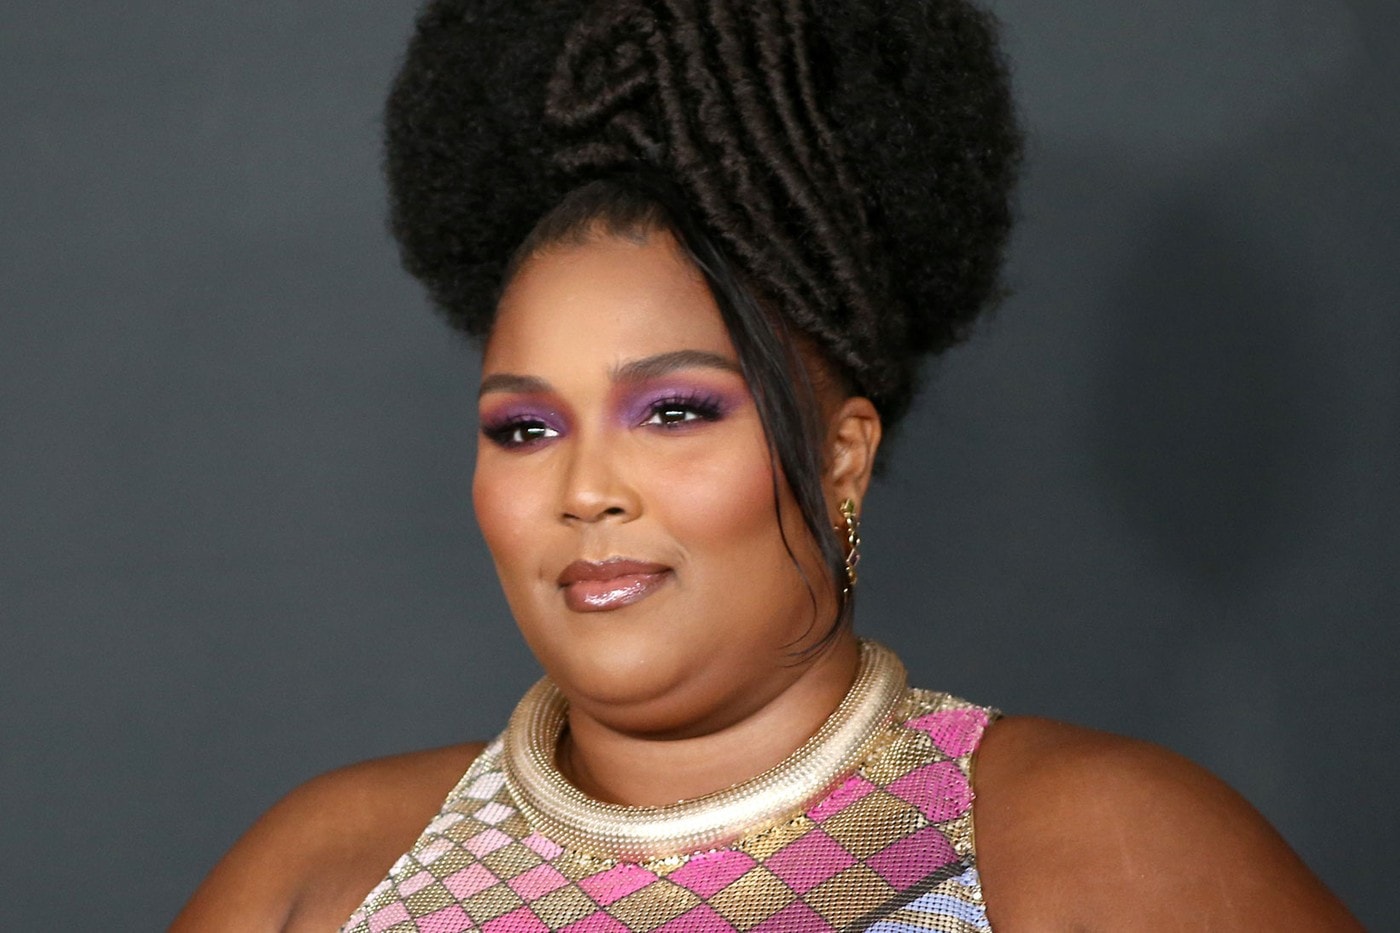 Singer Lizzo talks body positivity in her latest interview with